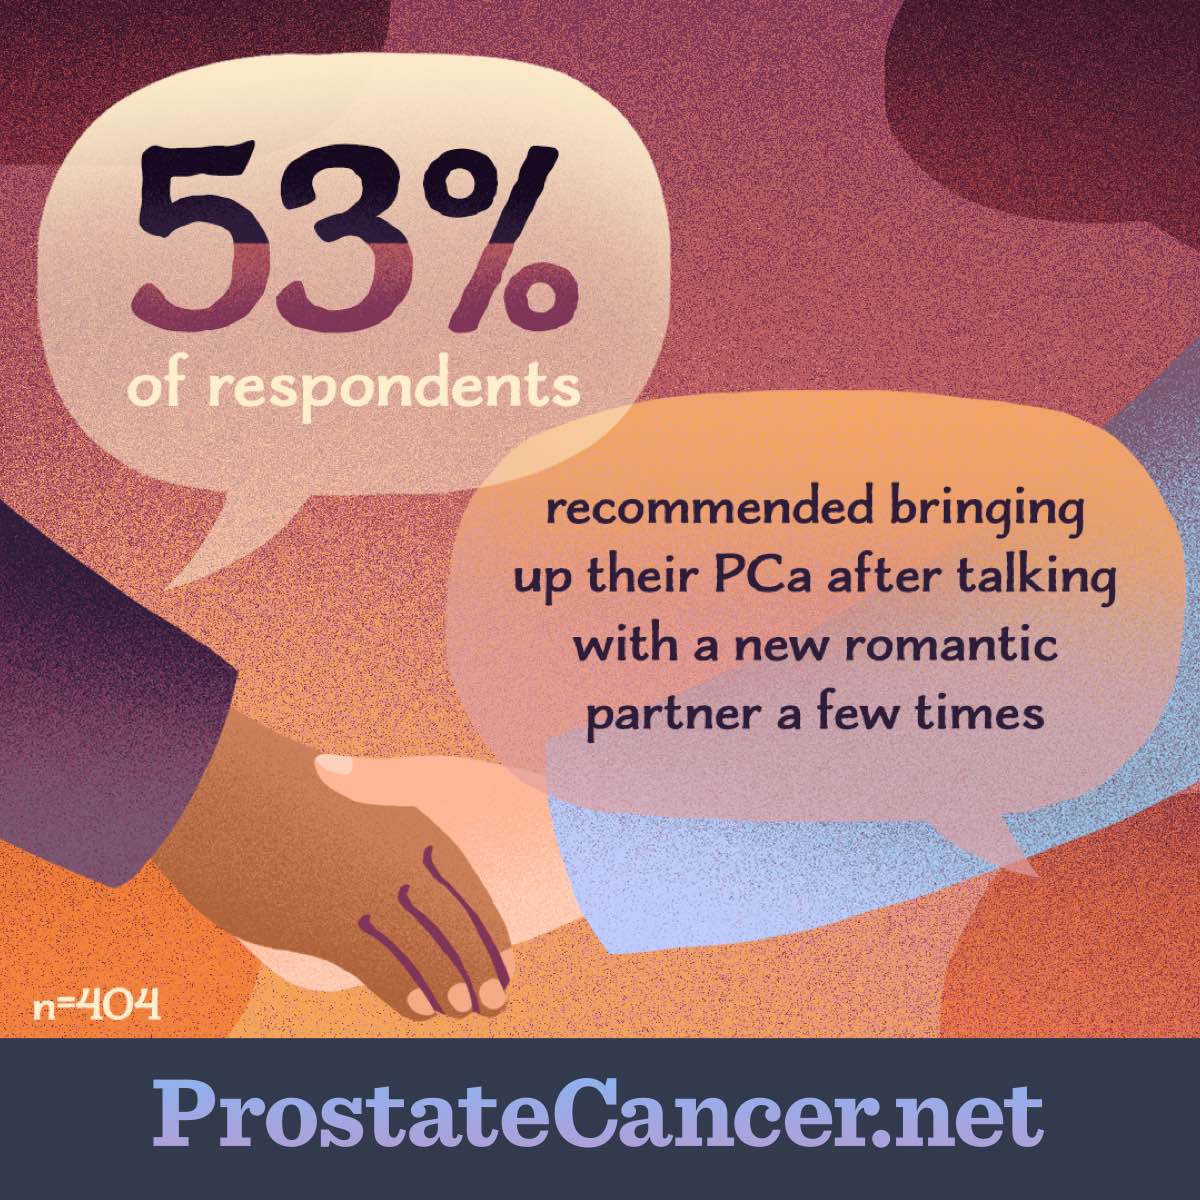 53% of respondents recommended bringing up their PCa after talking with a new romantic partner a few times.